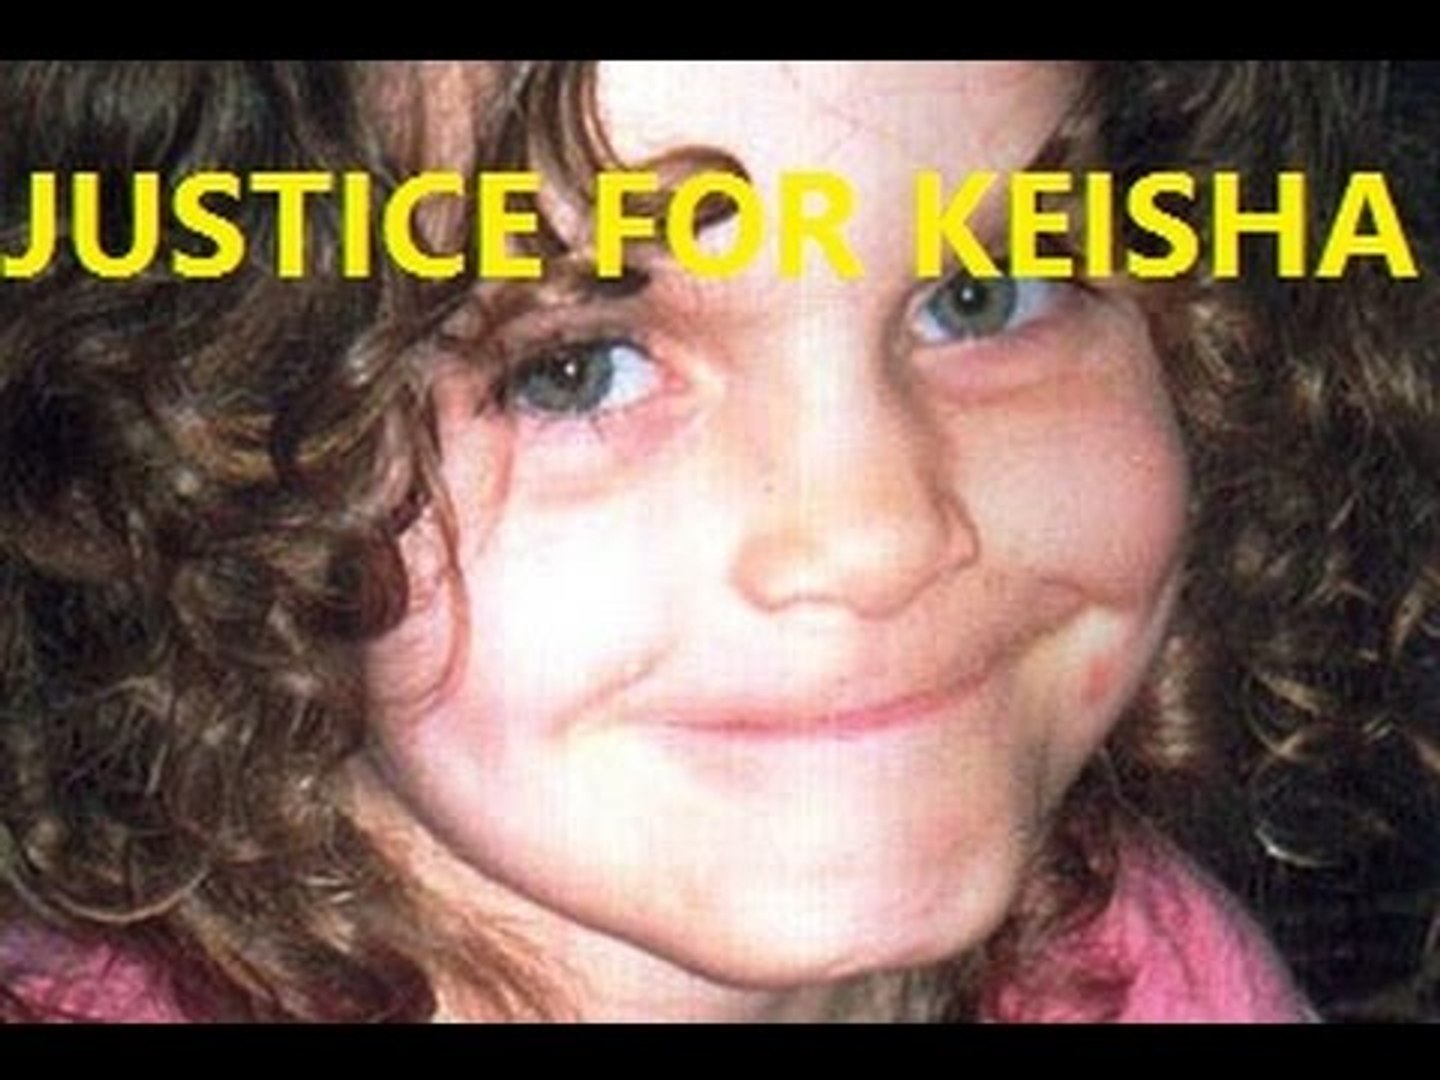 KEISHA WEIPPEART - THE MURDER OF A LITTLE GIRL - JUSTICE FOR KIESHA !